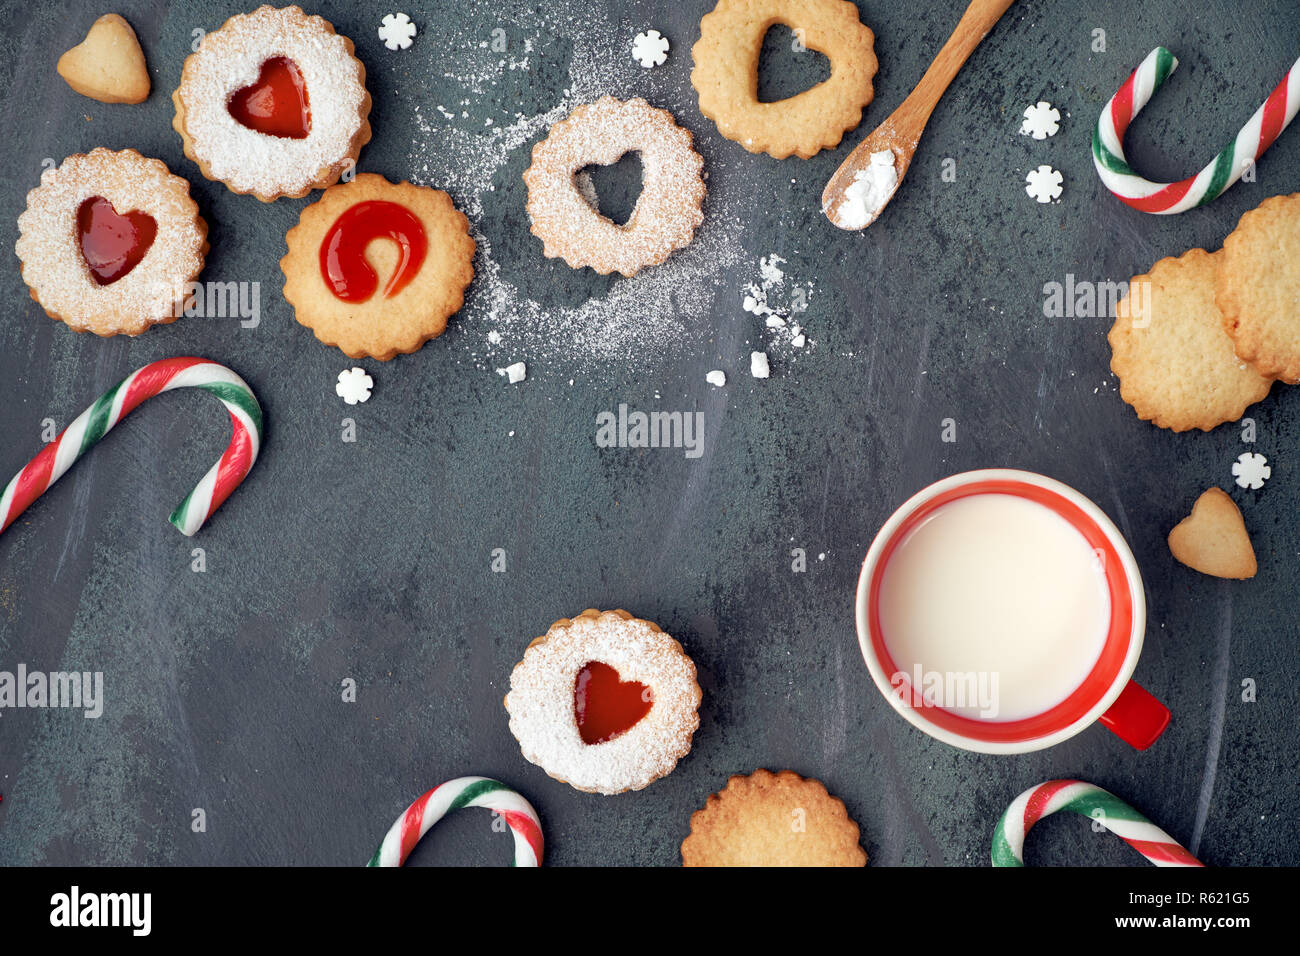 Top View Of Traditional Christmas Linzer Cookies With Strawberry Jam Candy Canes And Milk On Dark Background Stock Photo Alamy